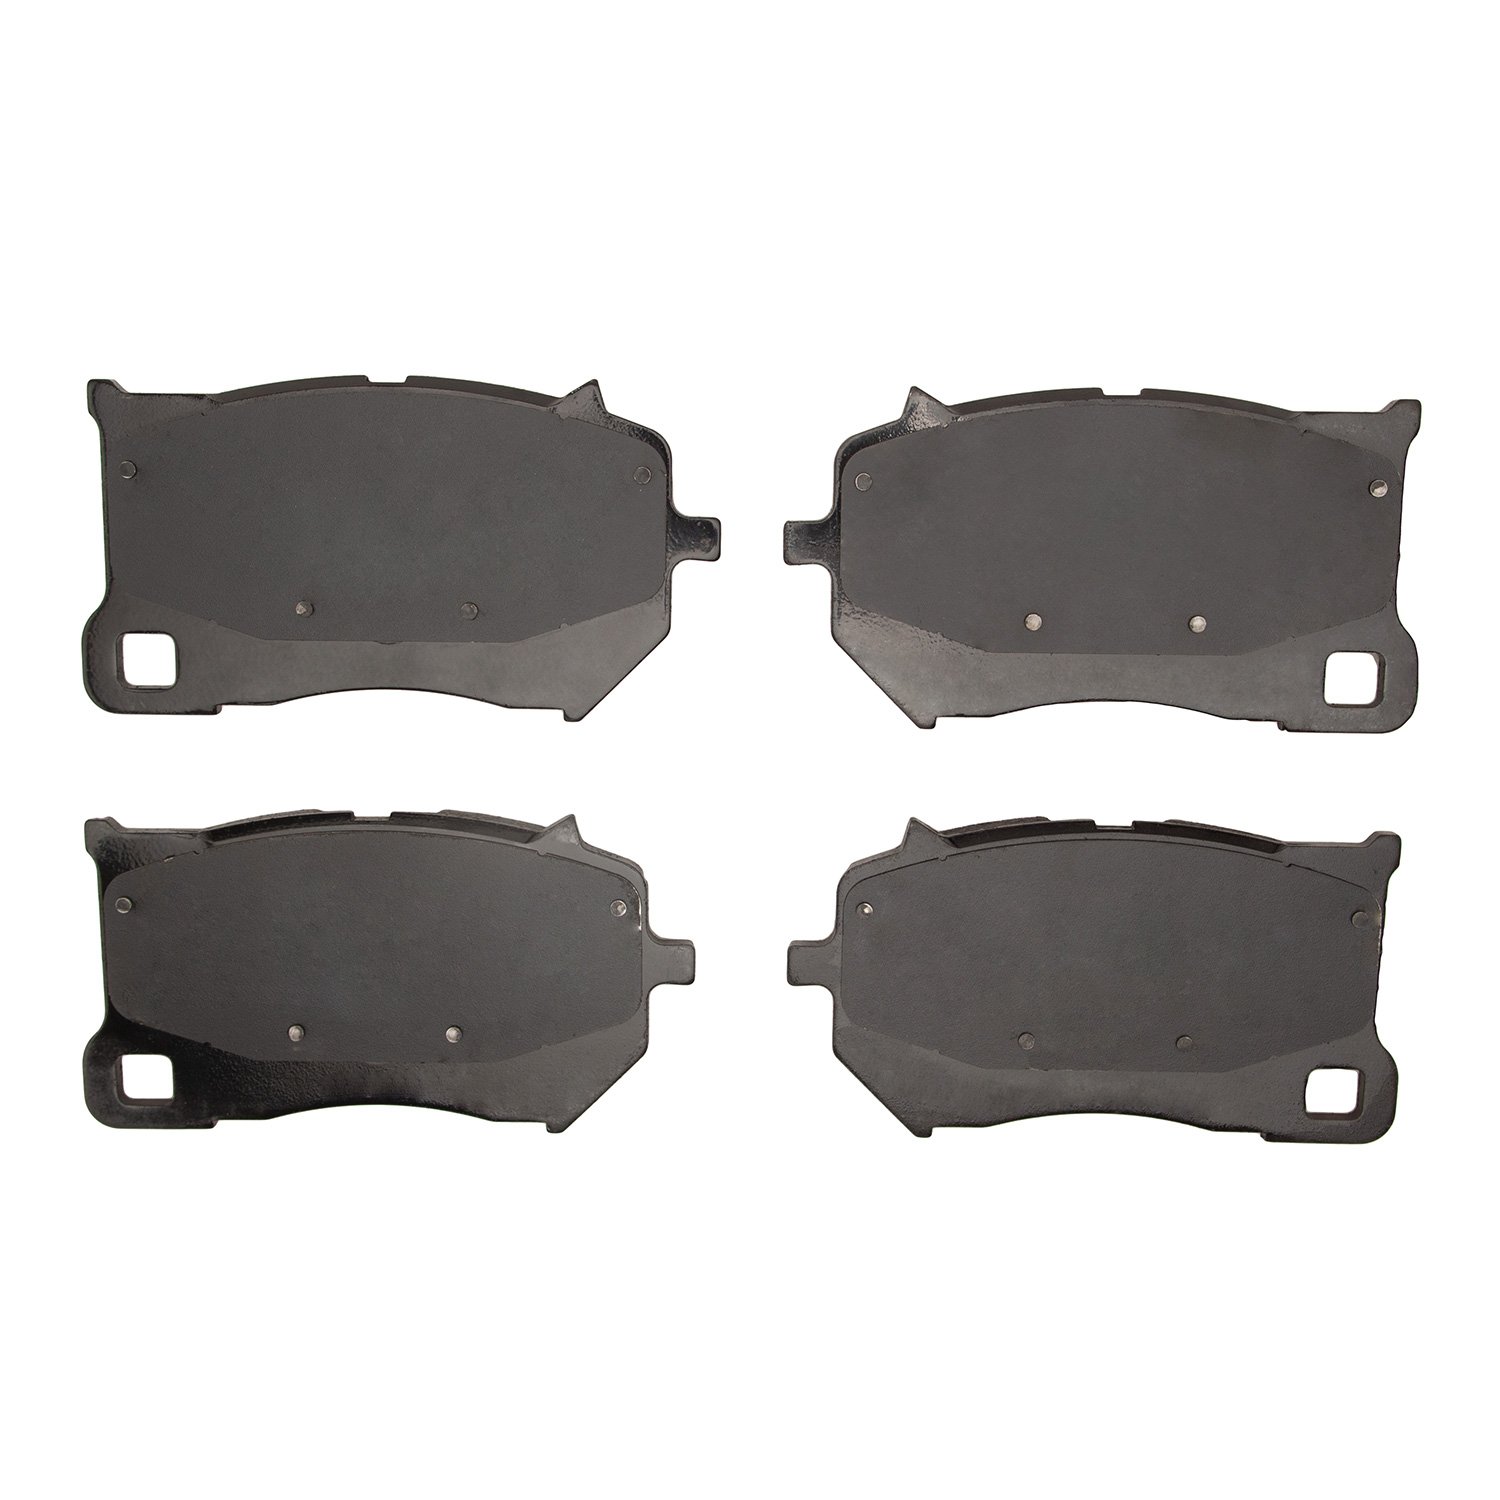 1551-2284-00 5000 Advanced Low-Metallic Brake Pads, Fits Select Multiple Makes/Models, Position: Front